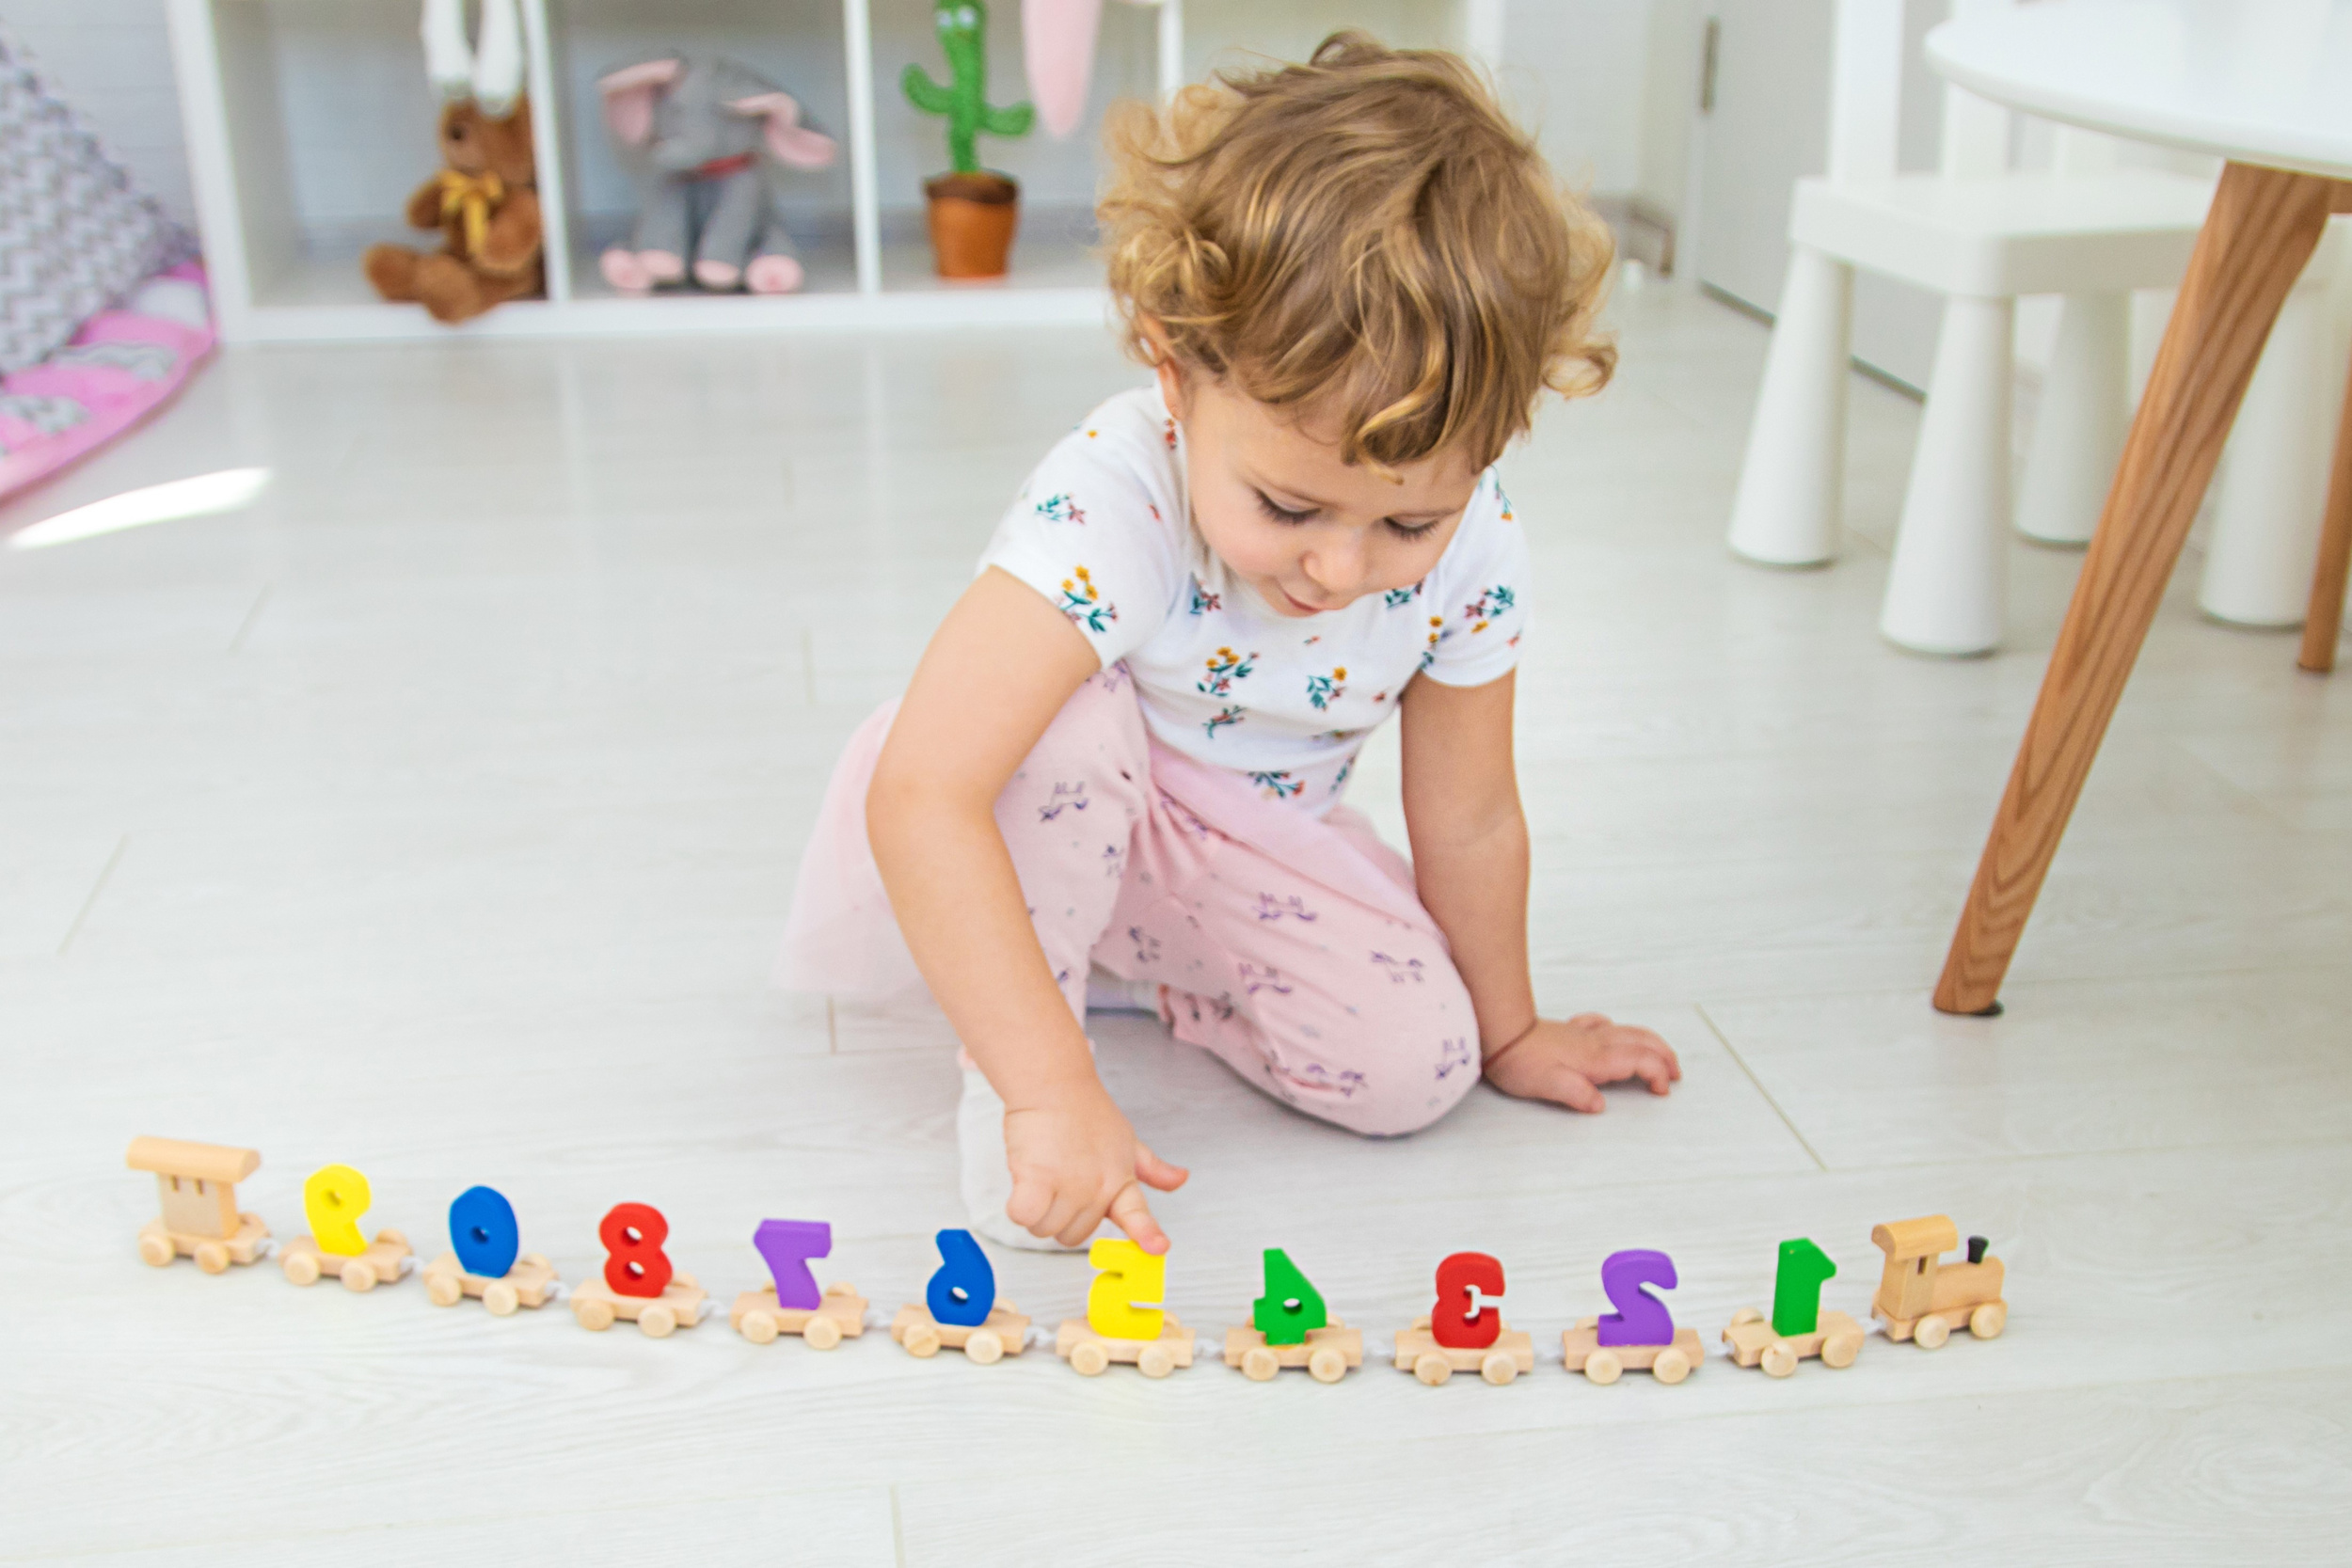 a-child-plays-with-a-train-made-of-numbers-selective-focus.jpg